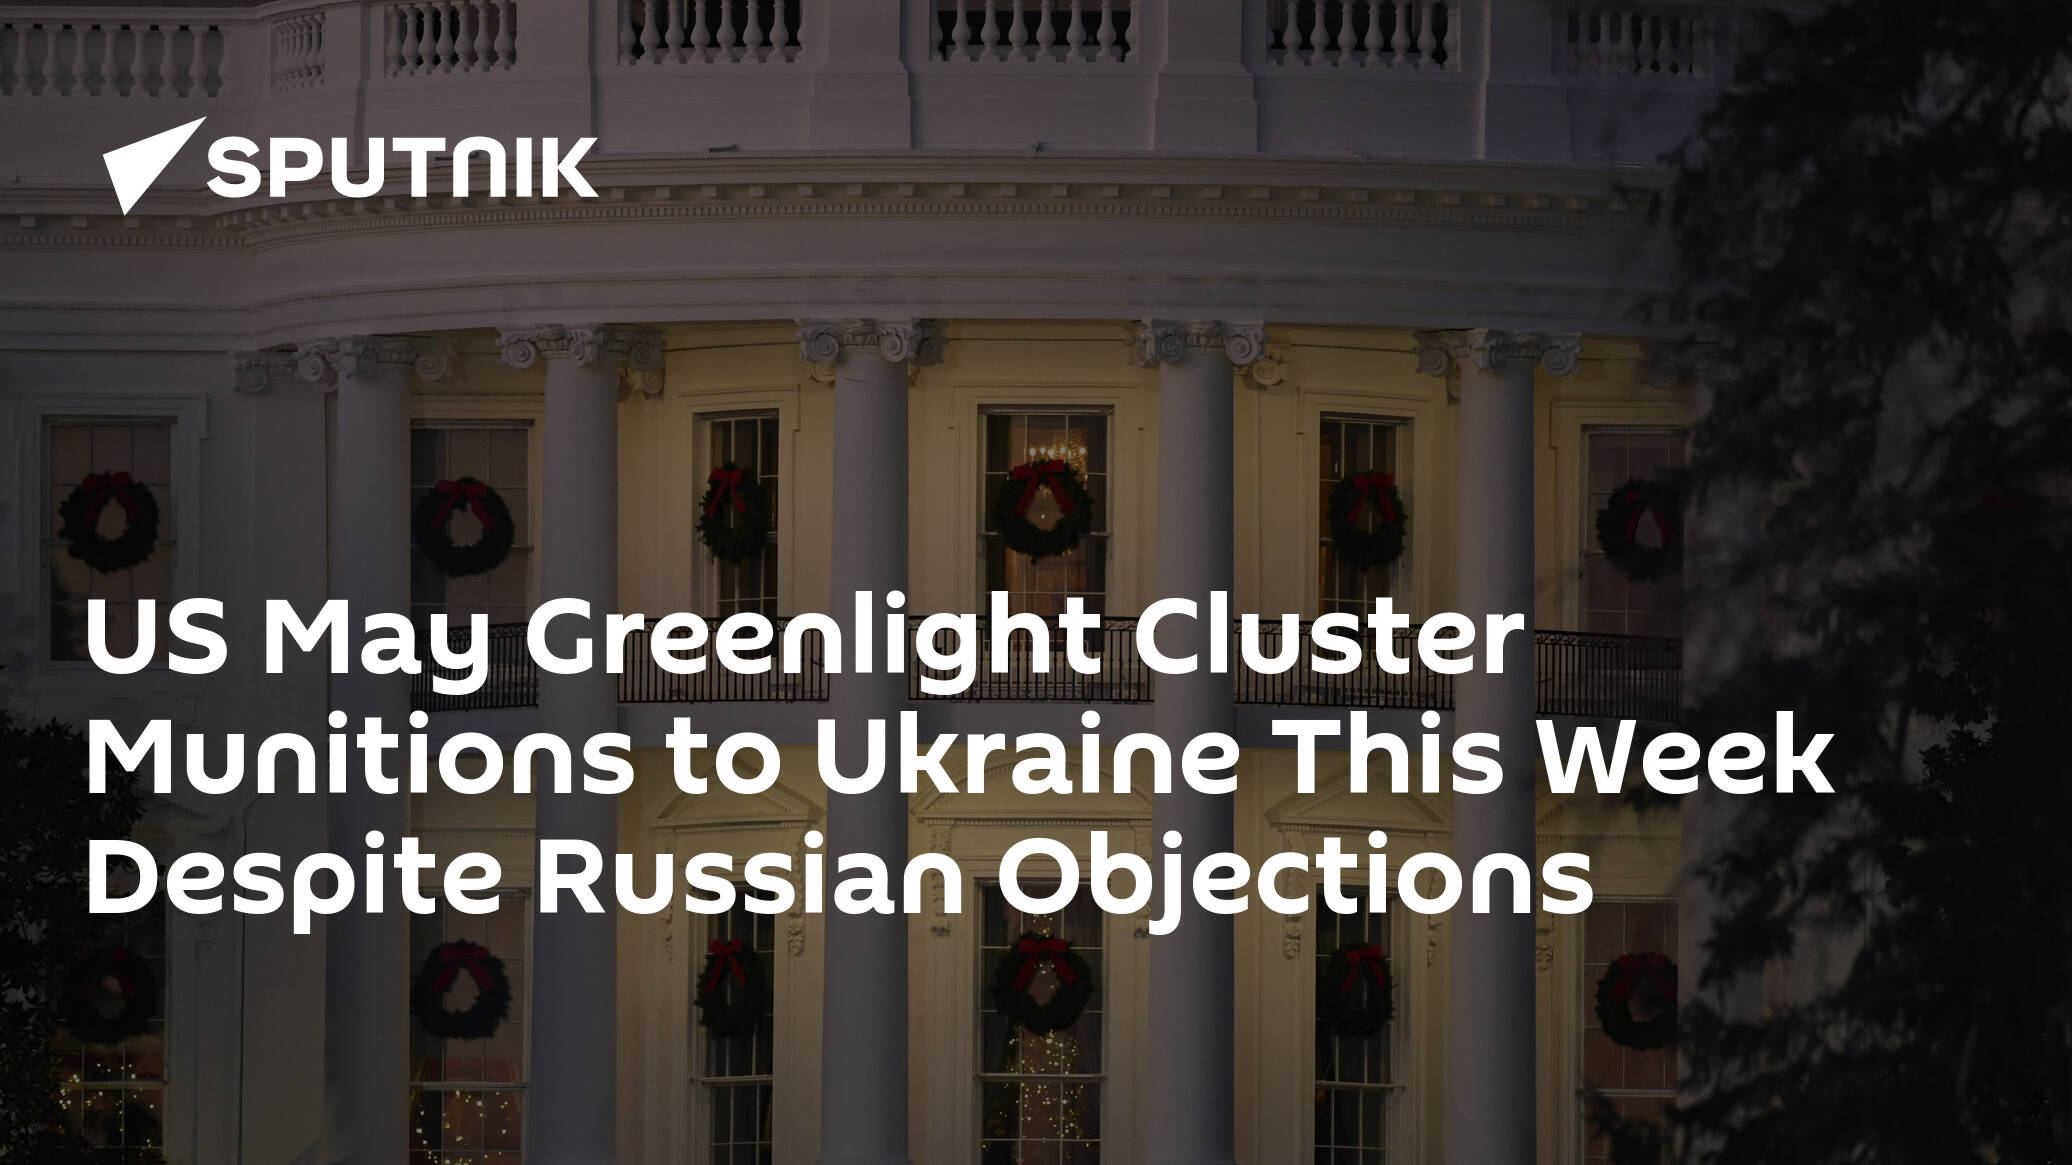 US May Greenlight Cluster Munitions to Ukraine This Week Despite Russian Objections